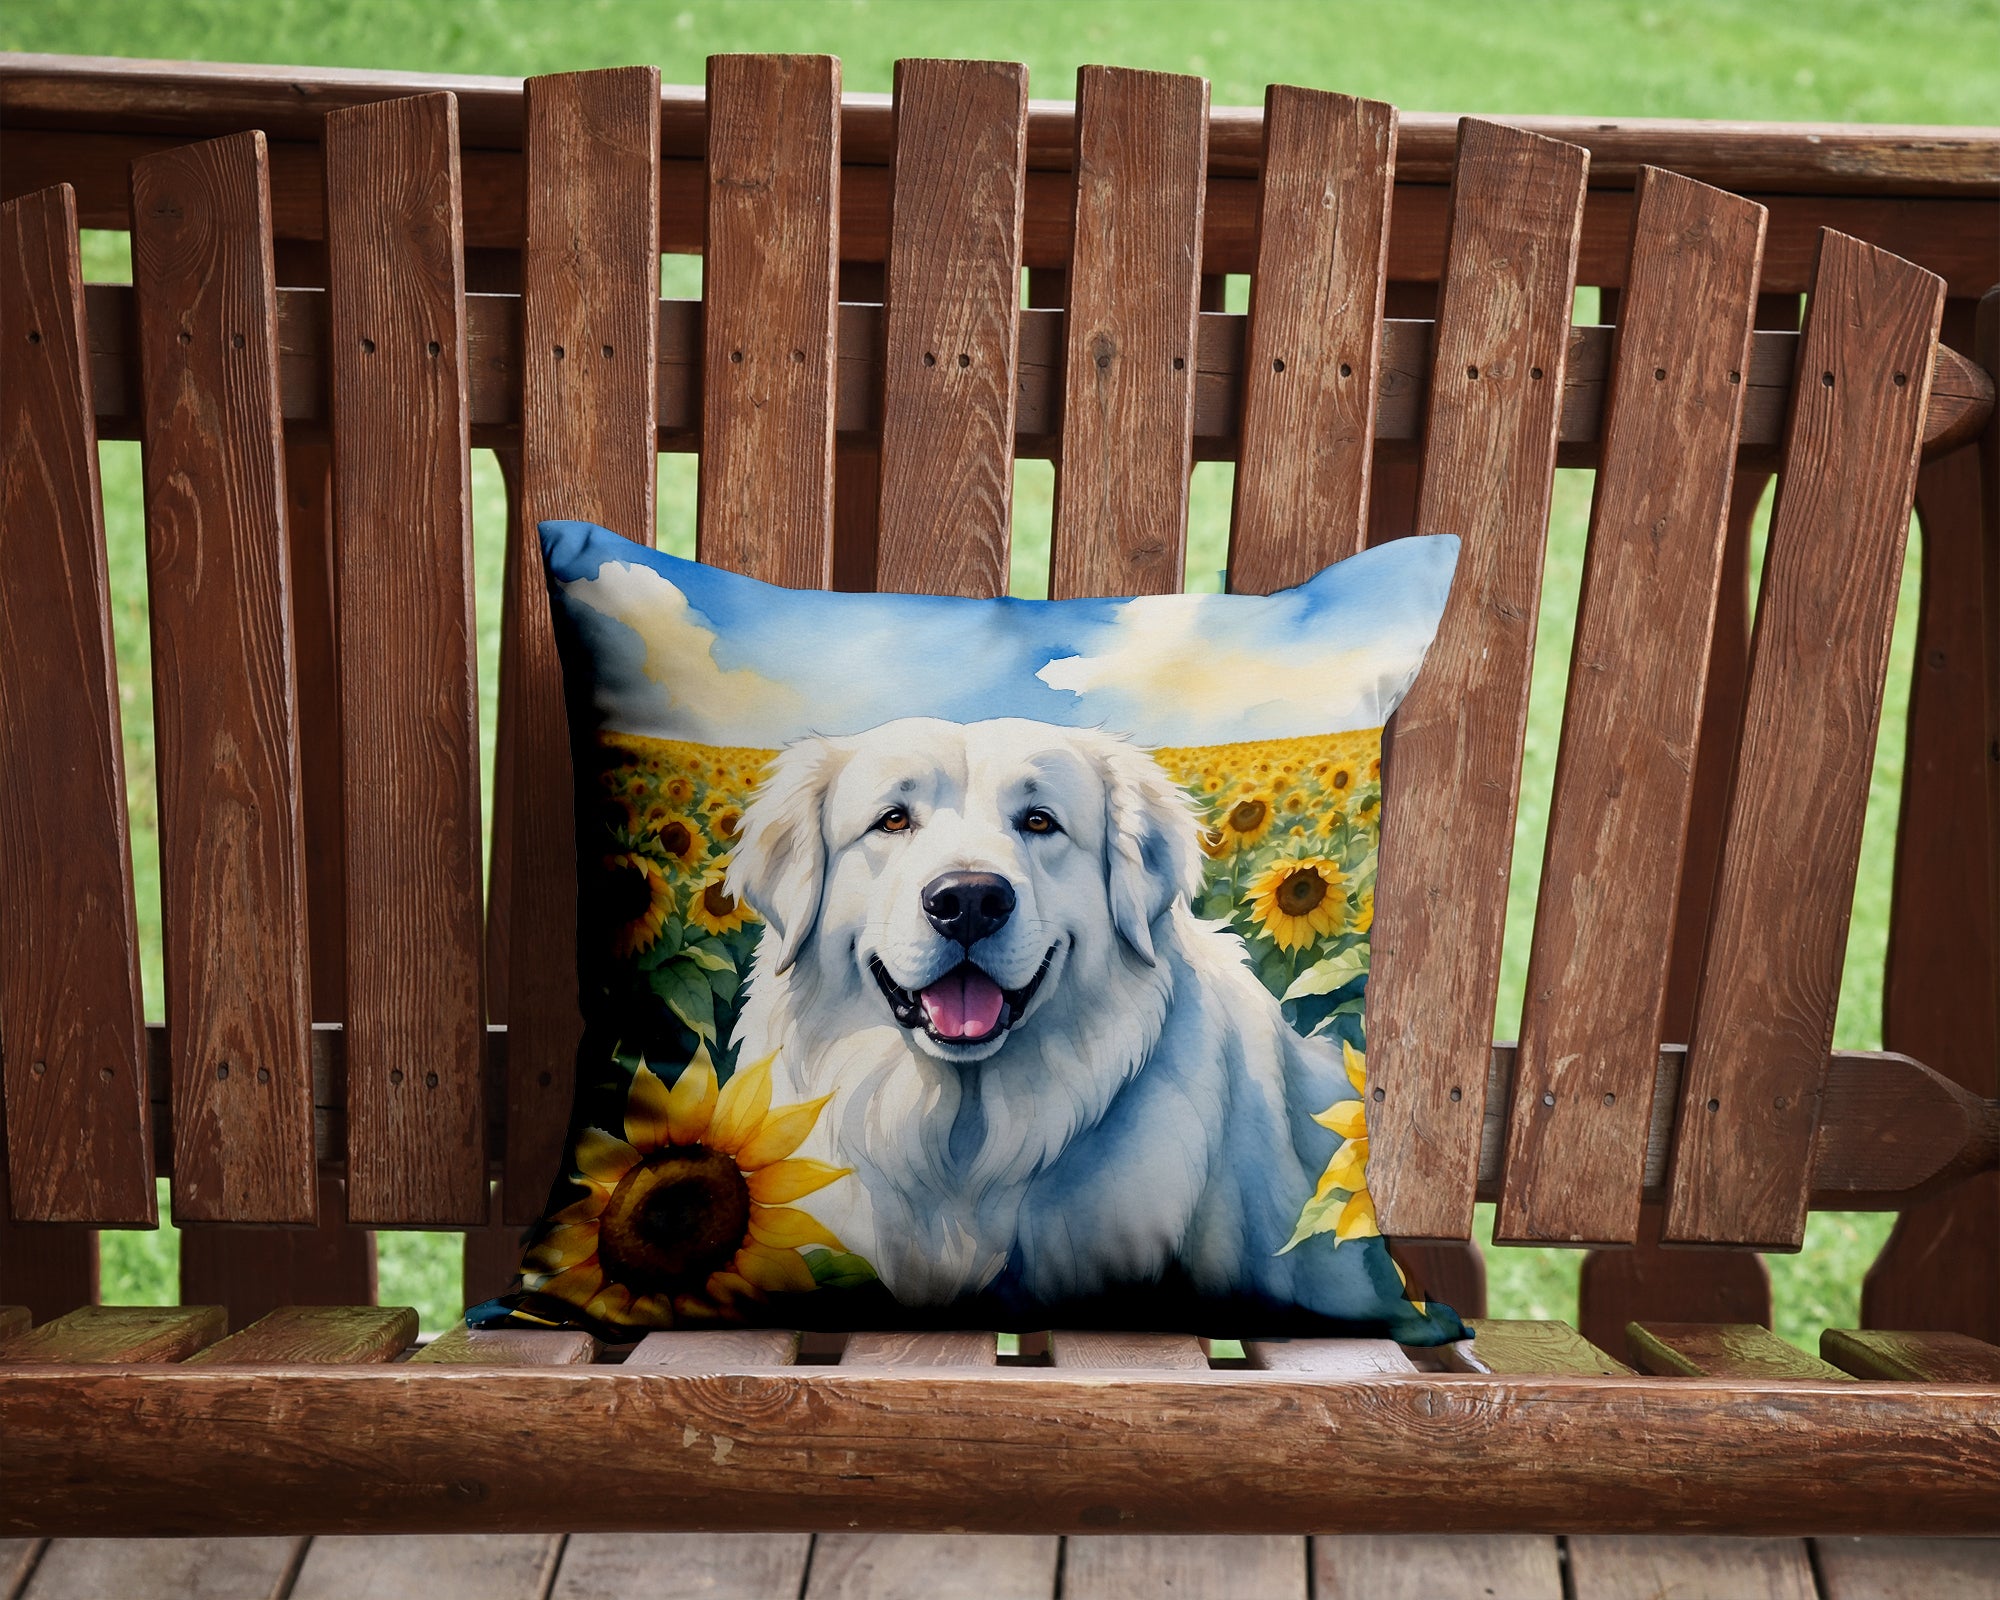 Buy this Great Pyrenees in Sunflowers Throw Pillow